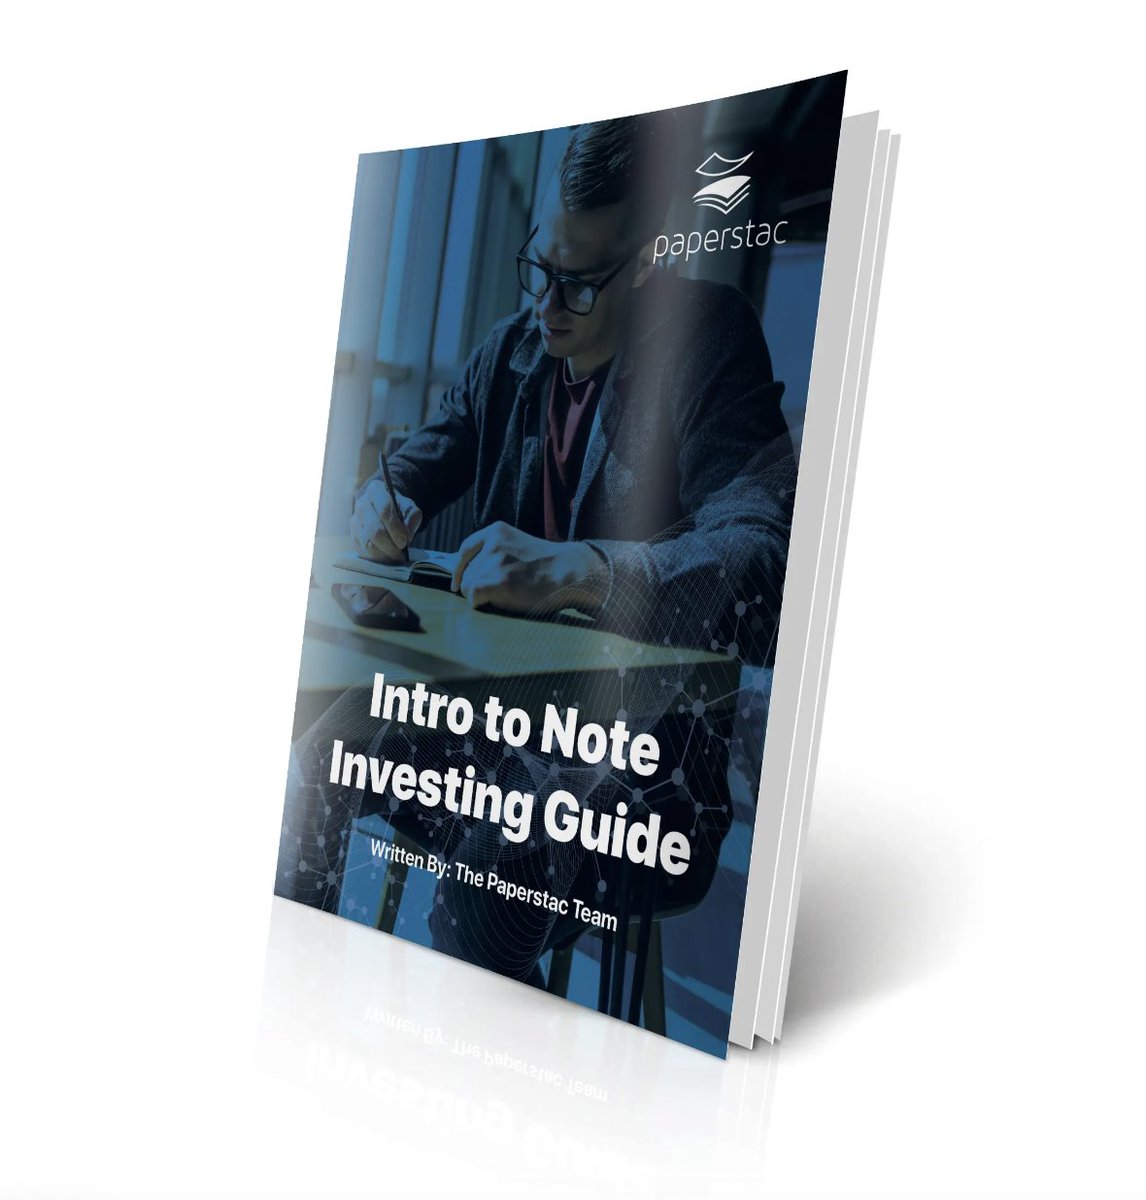 Intro to Note Investing Guide

For Real Estate Investors, Entrepreneurs & Action Takers

💻Download our FREE Guide here: 👇
academy.paperstac.com/intro-to-note-…

#Noteinvesting #RealEstateInvesting #MortgageNotes #BuildingWealth #InvestingForBeginners #PassiveIncome